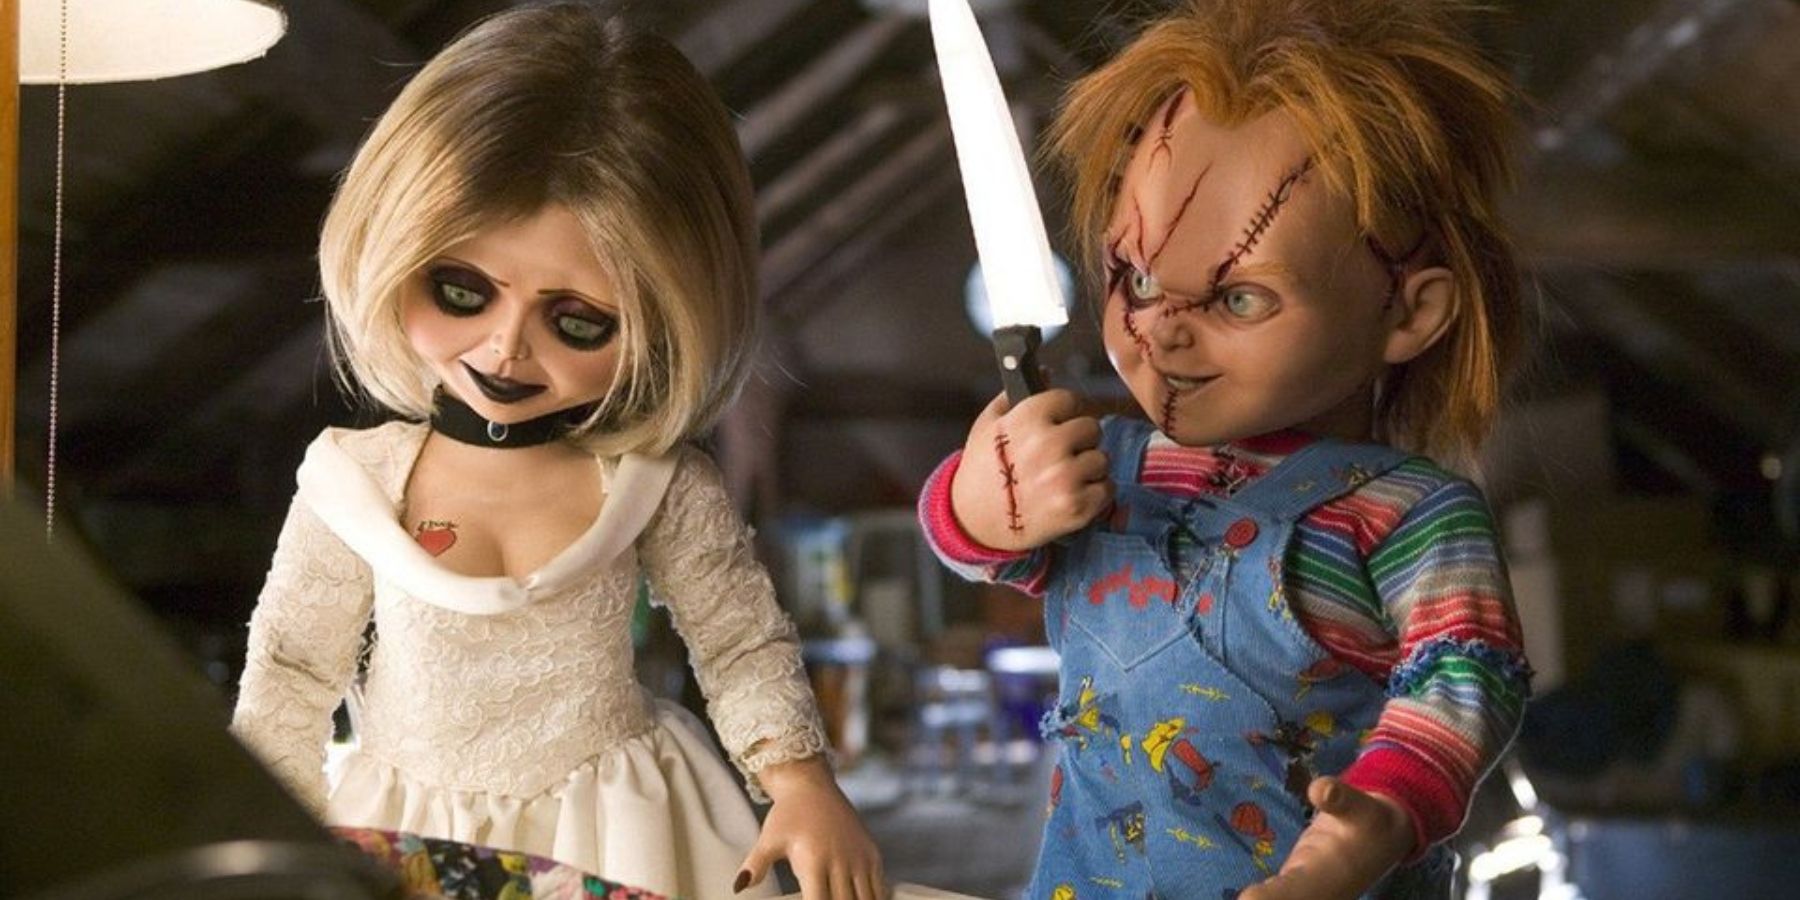 Tiffany and Chucky dolls in Seed Of Chucky